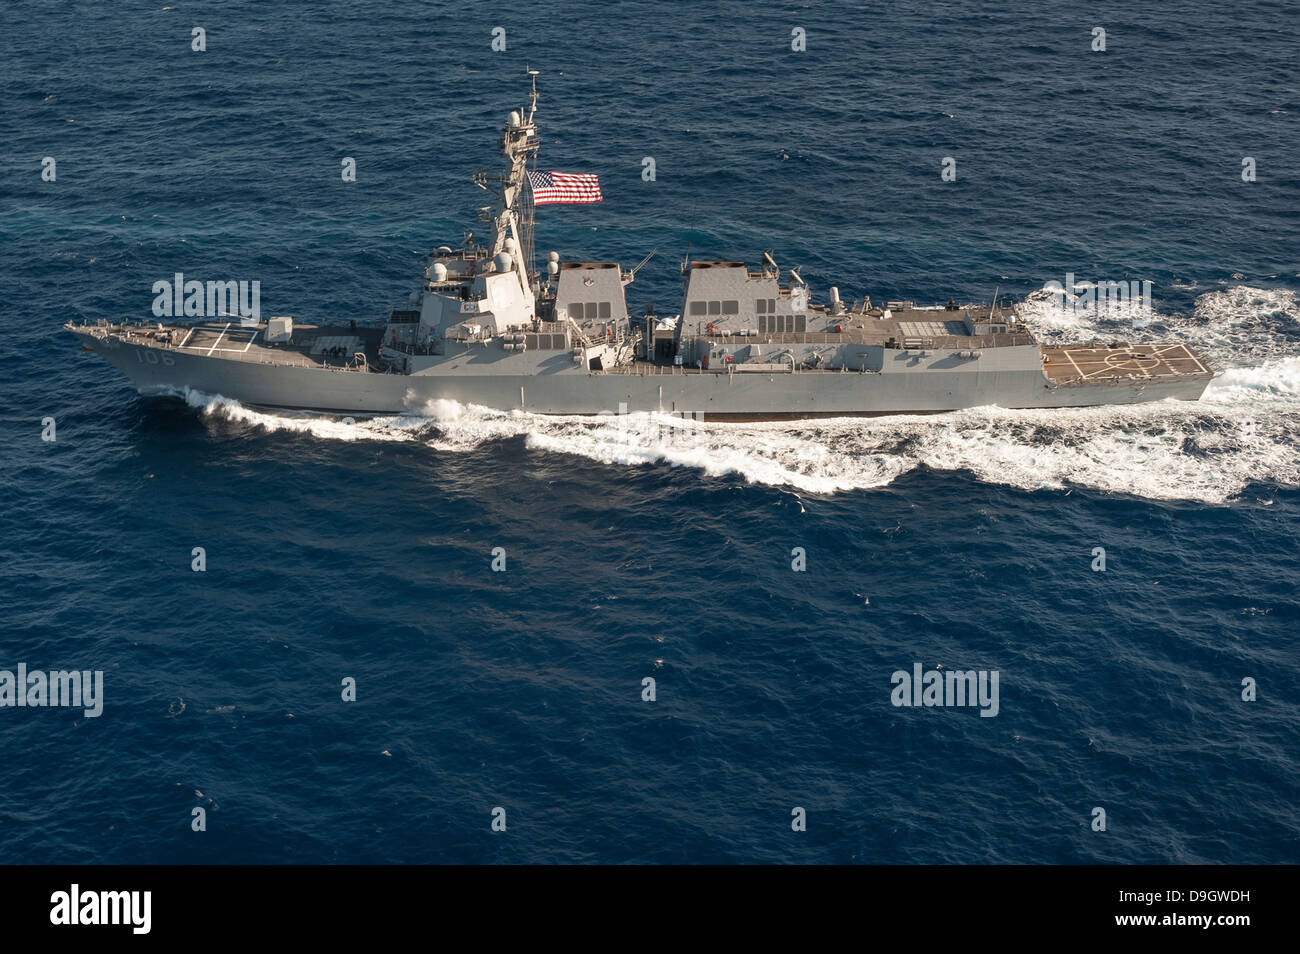 The Arleigh Burke-class guided-missile destroyer USS Stockdale. Stock Photo